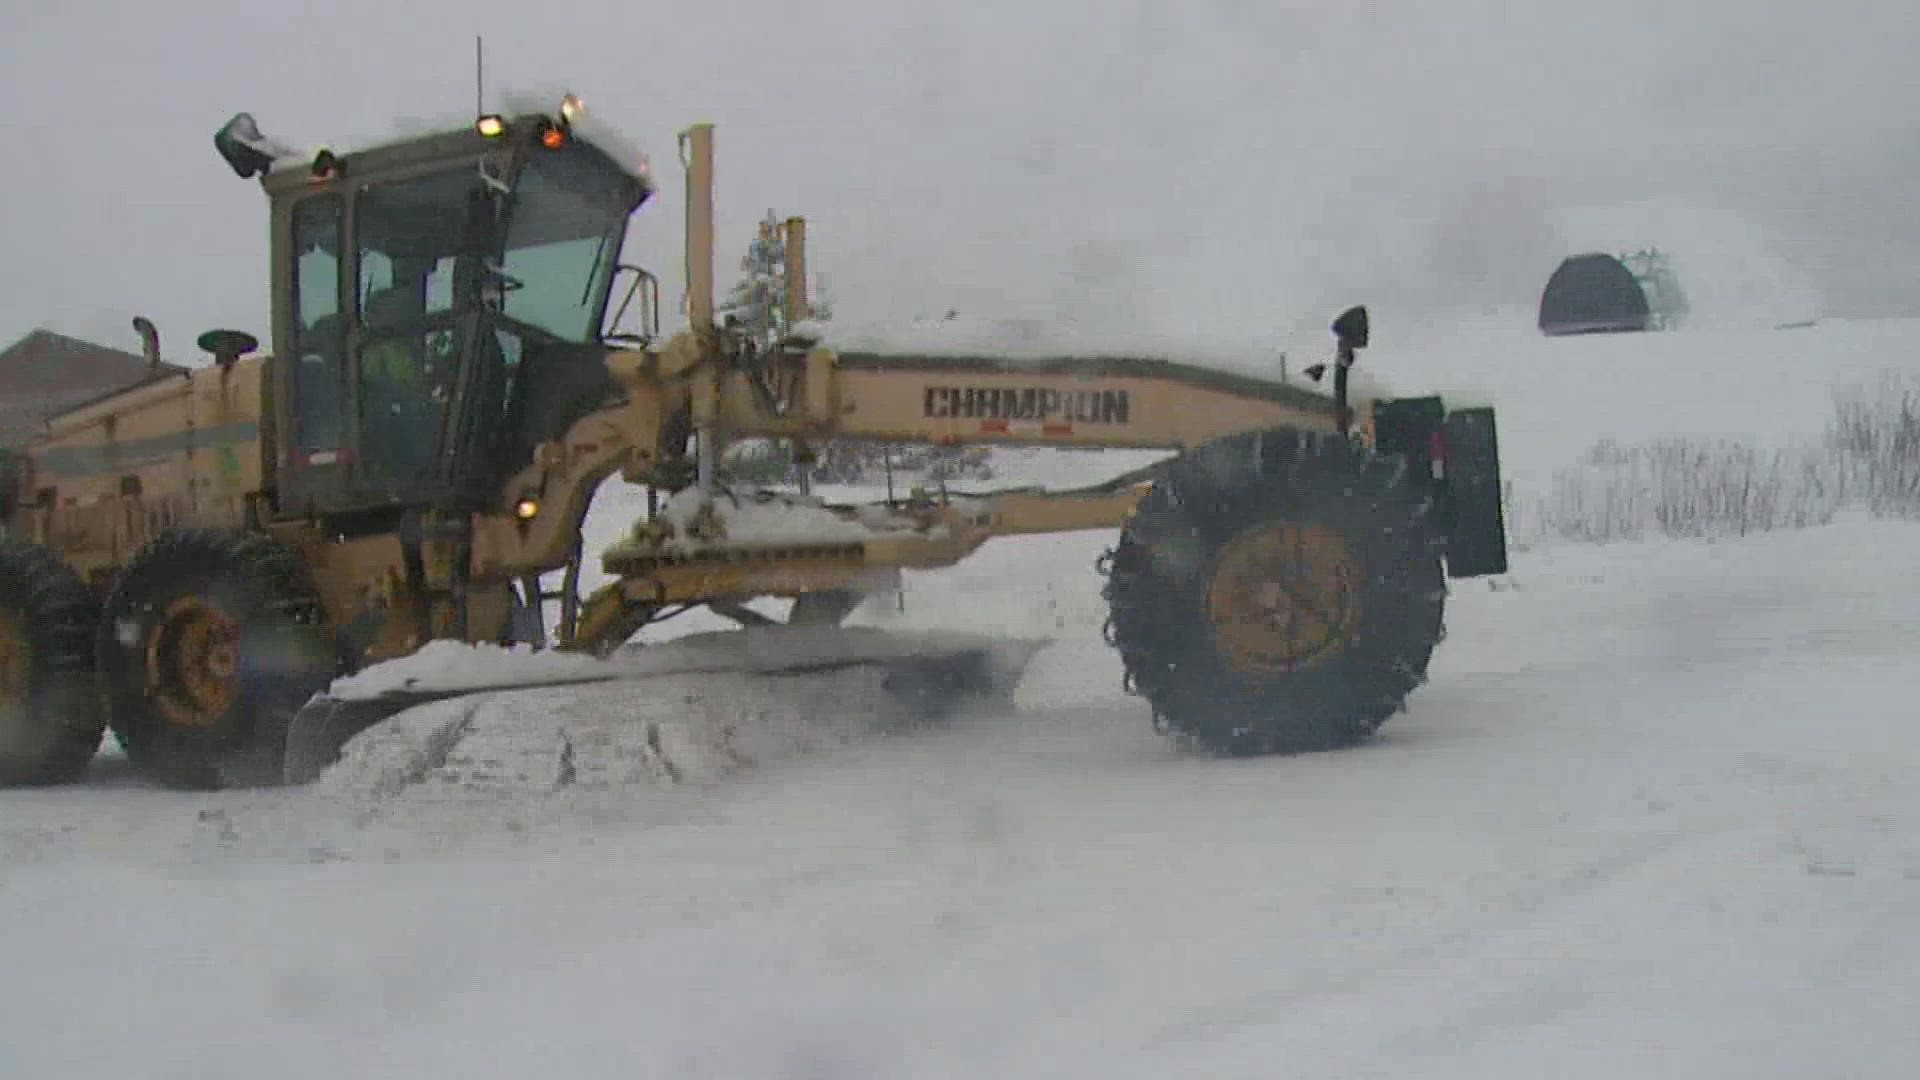 WSDOT said it is down 177 winter operations staff as the snowy weather begins to really take hold.